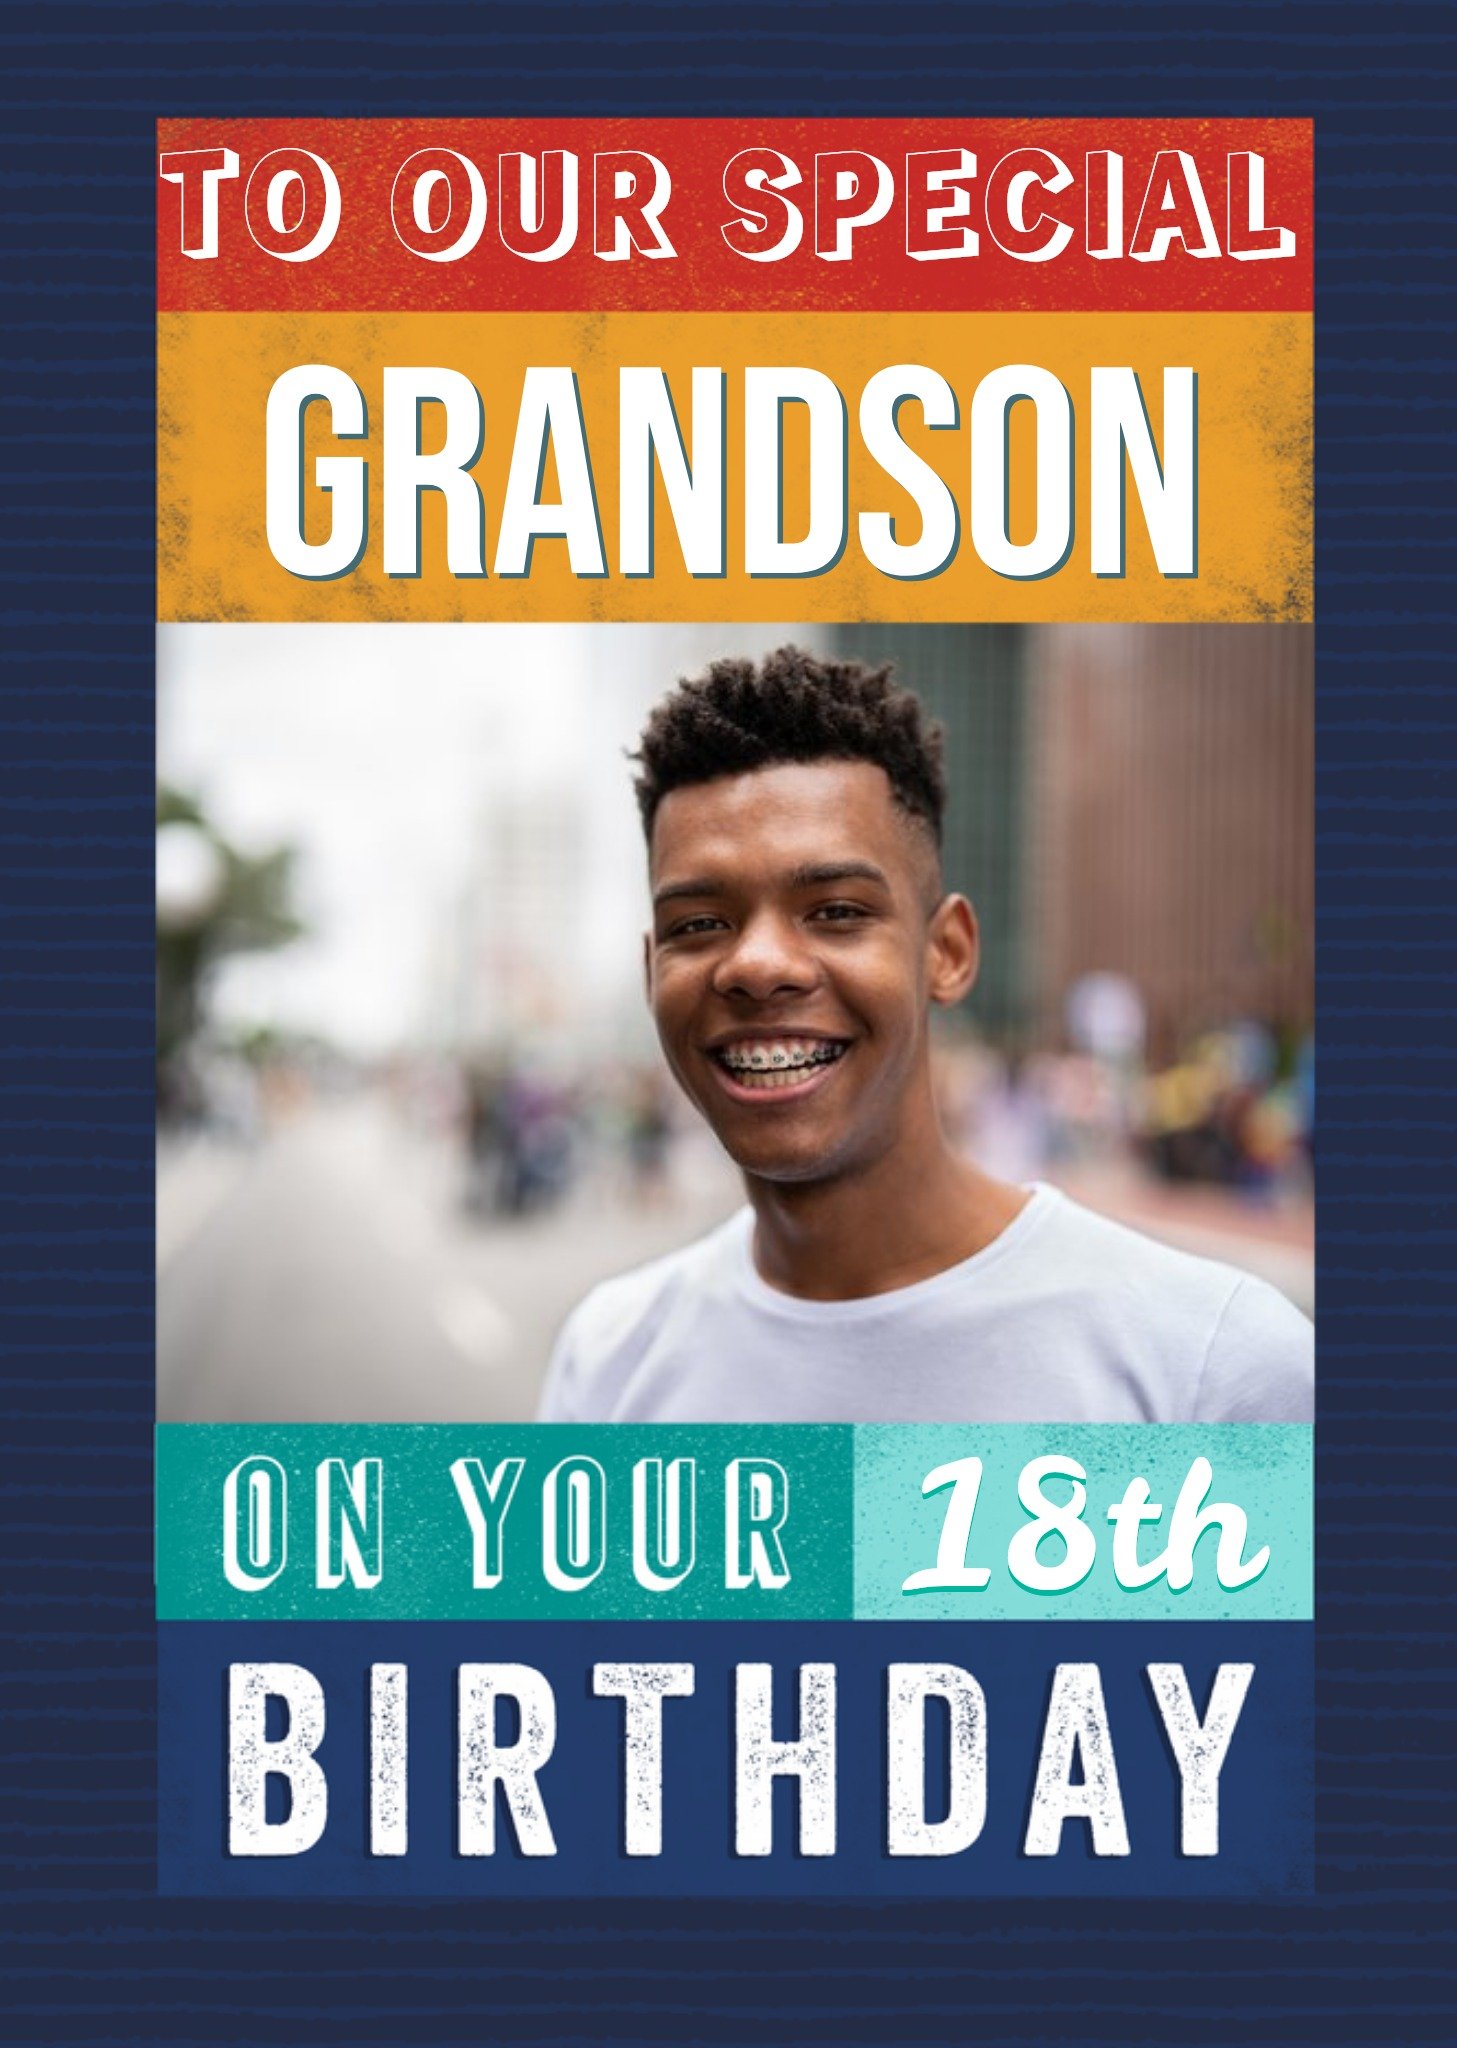 Moonpig To Our Special Grandson On Your 18th Birthday Photo Upload Birthday Card, Large